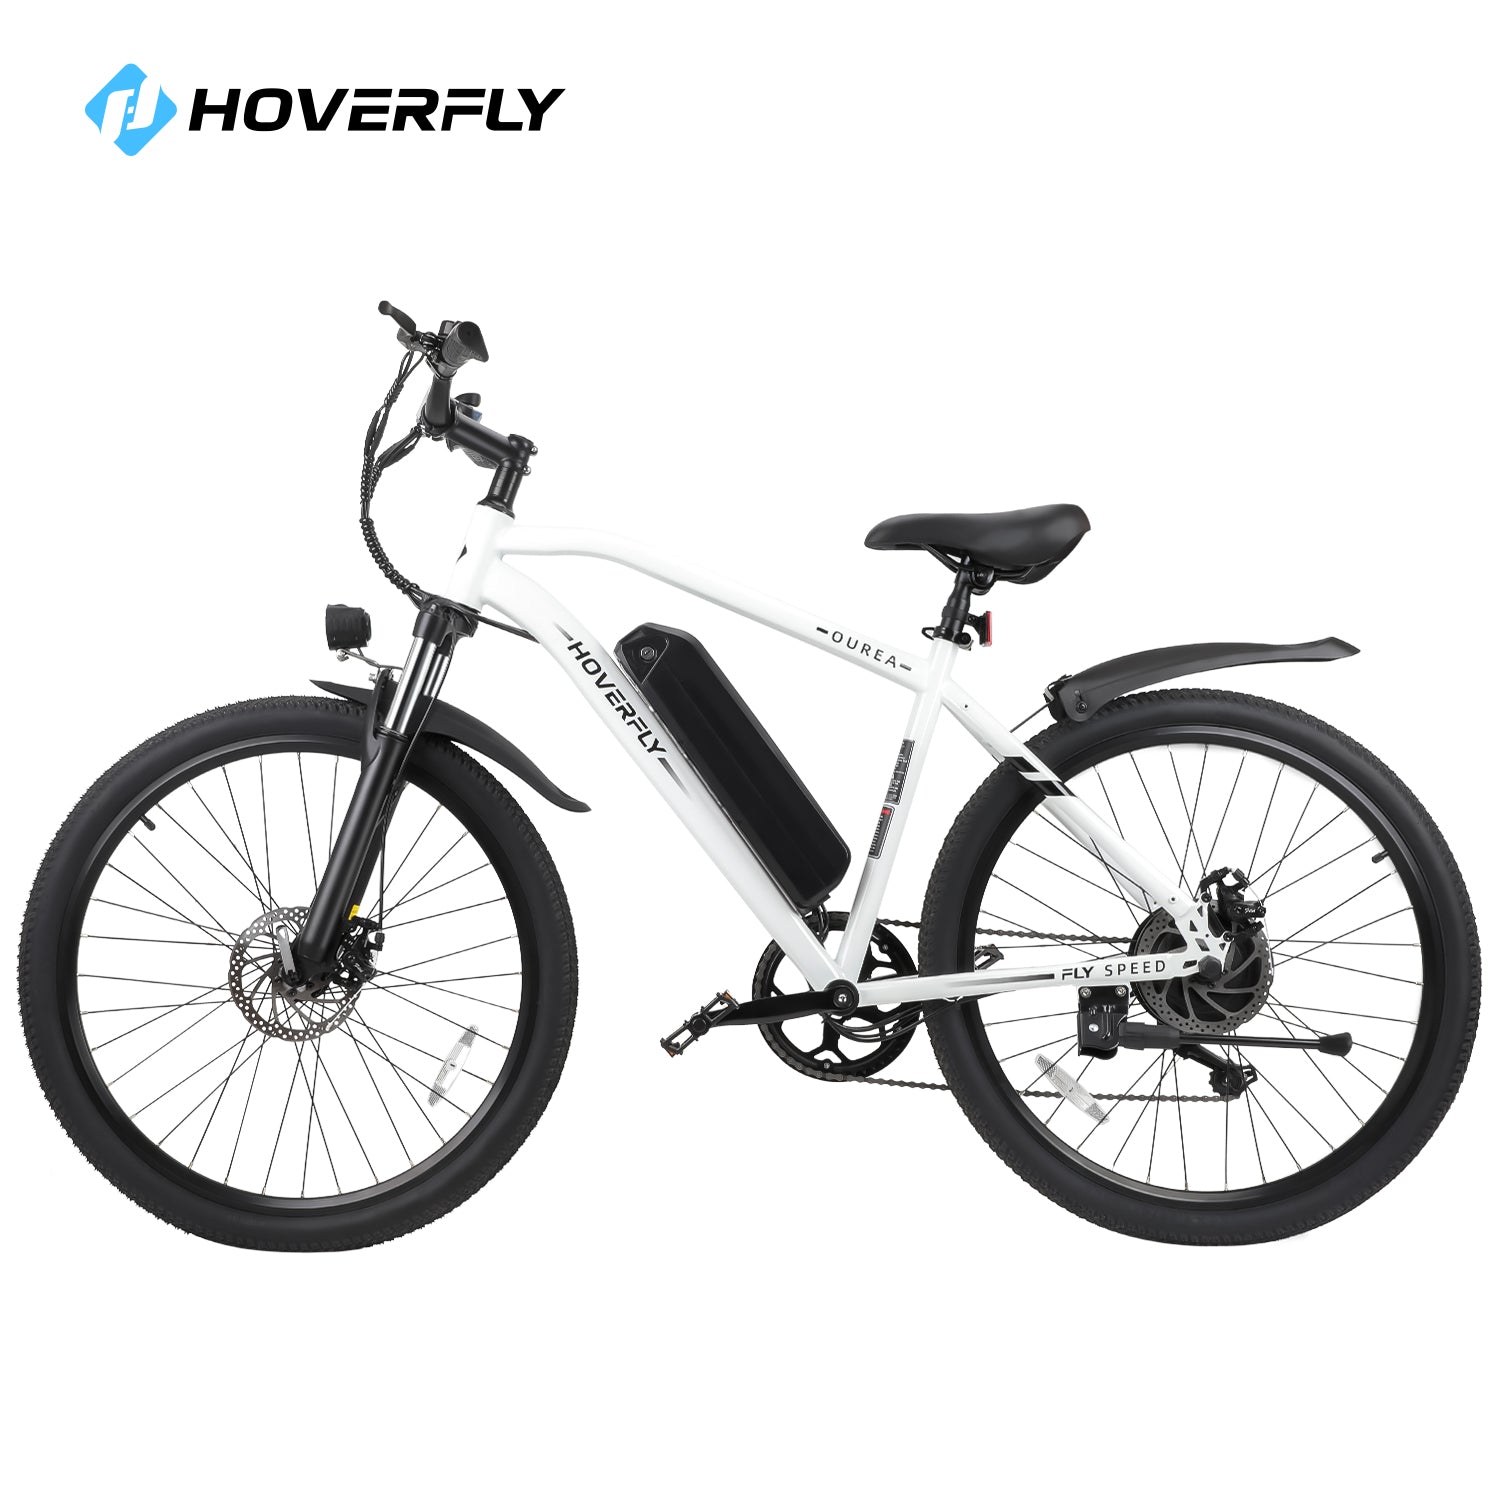 Hoverfly Ourea Commuter Electric Bike in White, Displaying Its Sturdy 26" Tires and Adjustable Front Suspension Fork. Designed for Smooth Riding Across Any Terrain, This Bike is Equipped with a Detachable Battery for Effortless Recharging.